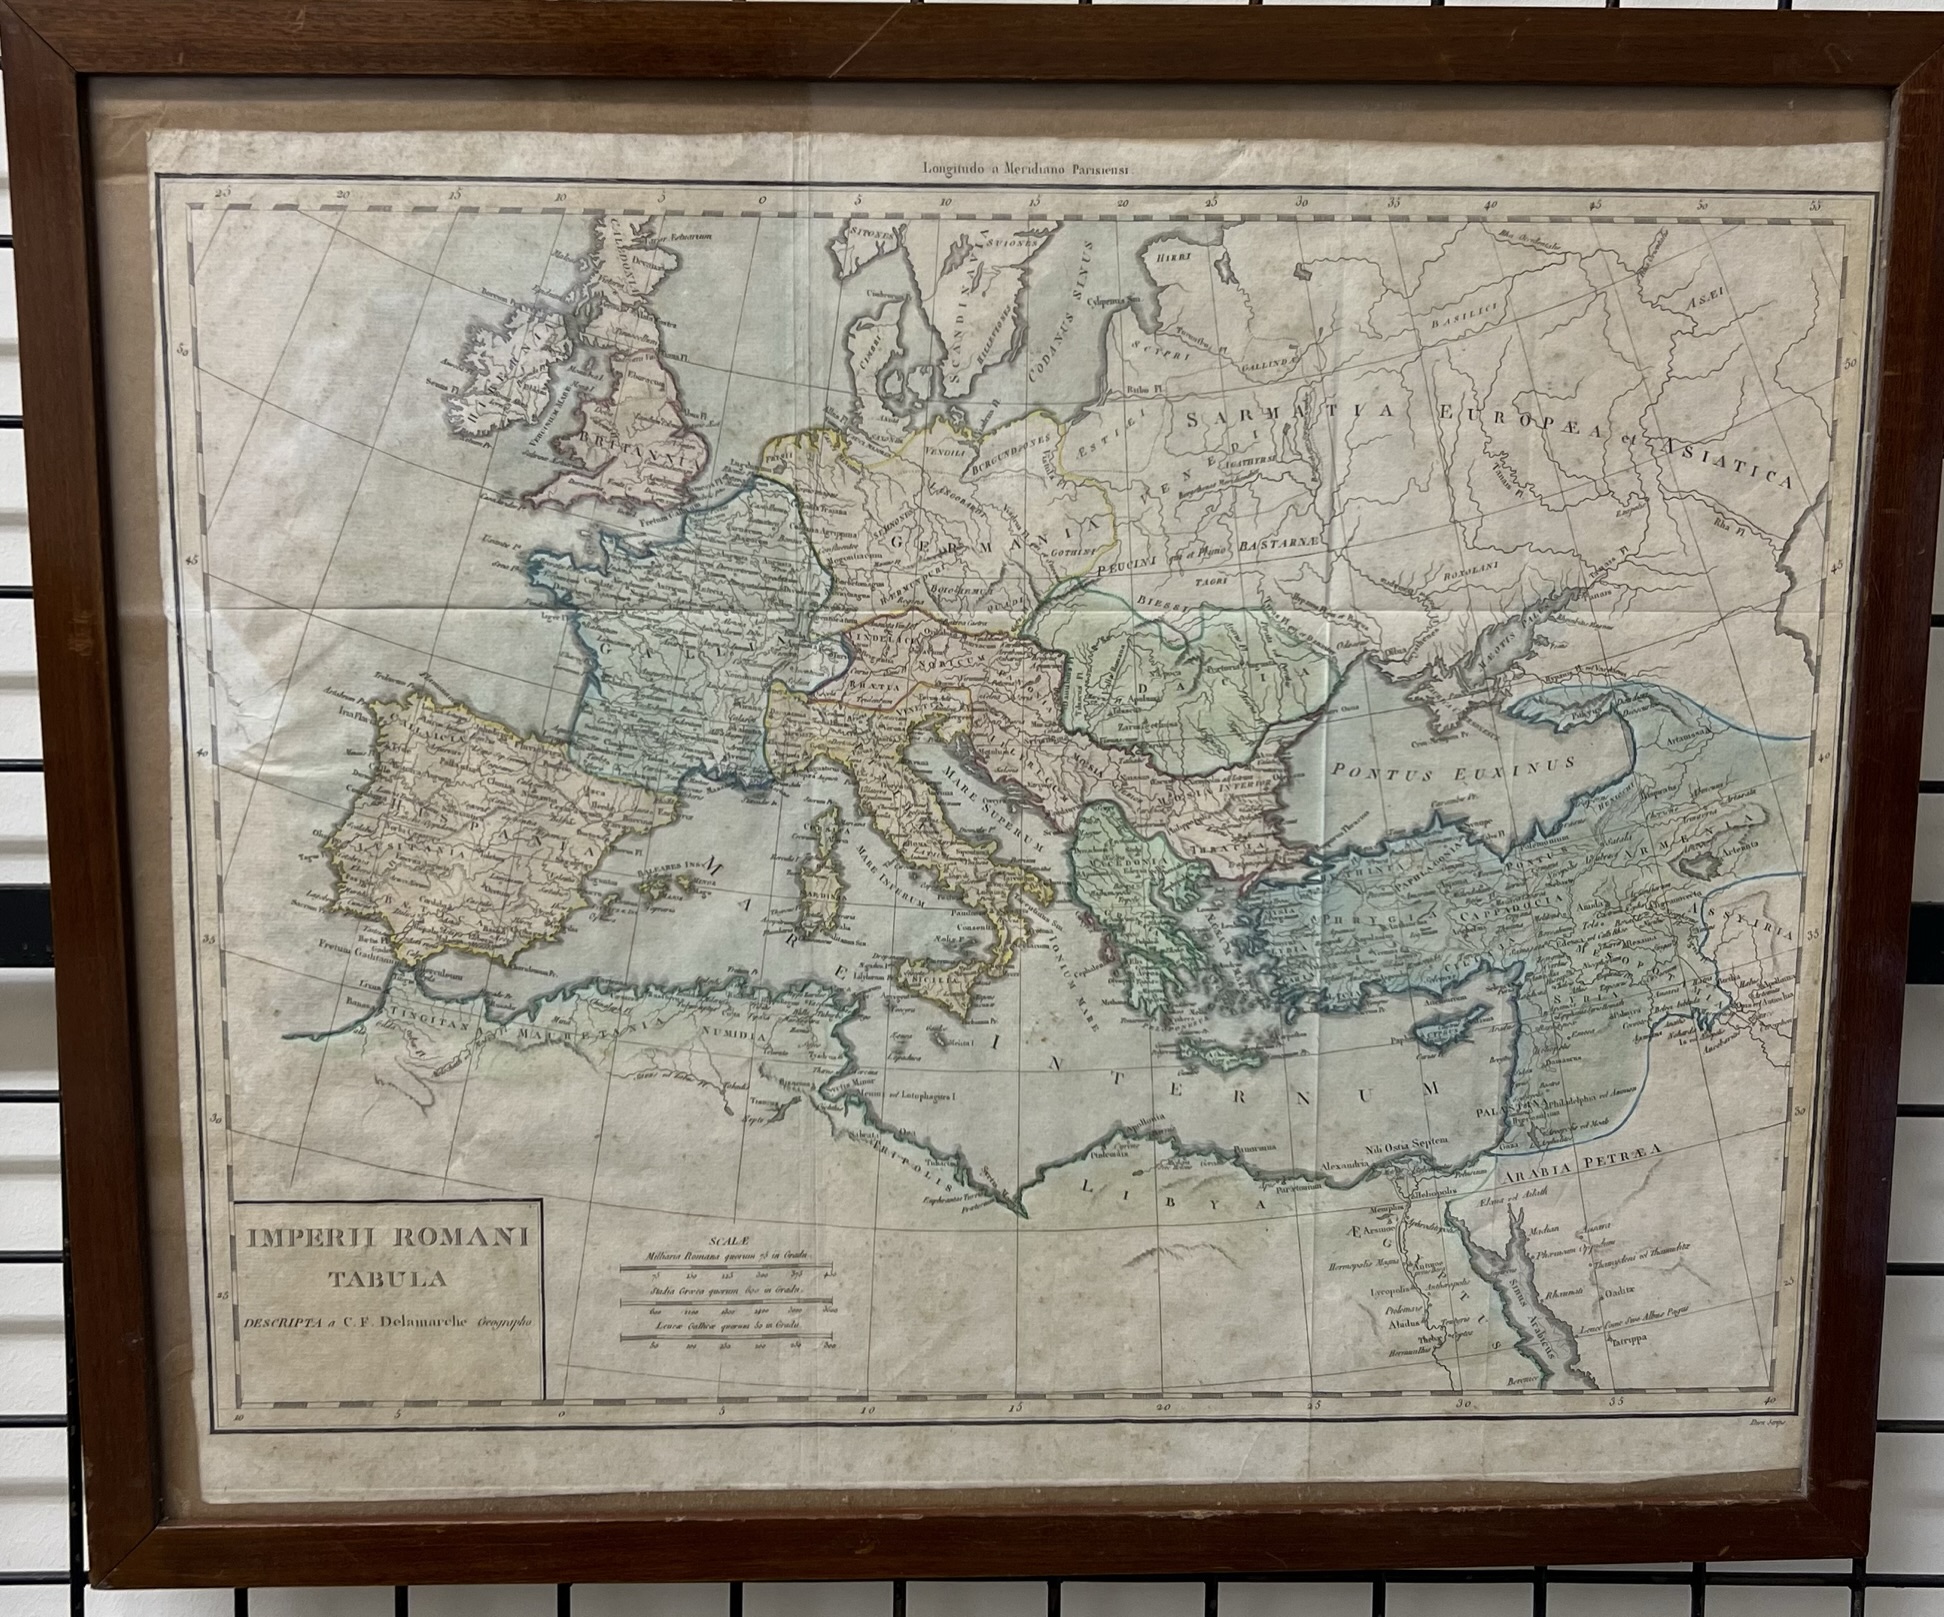 A later hand coloured map "Imperii Romani Tabula", by C.F.